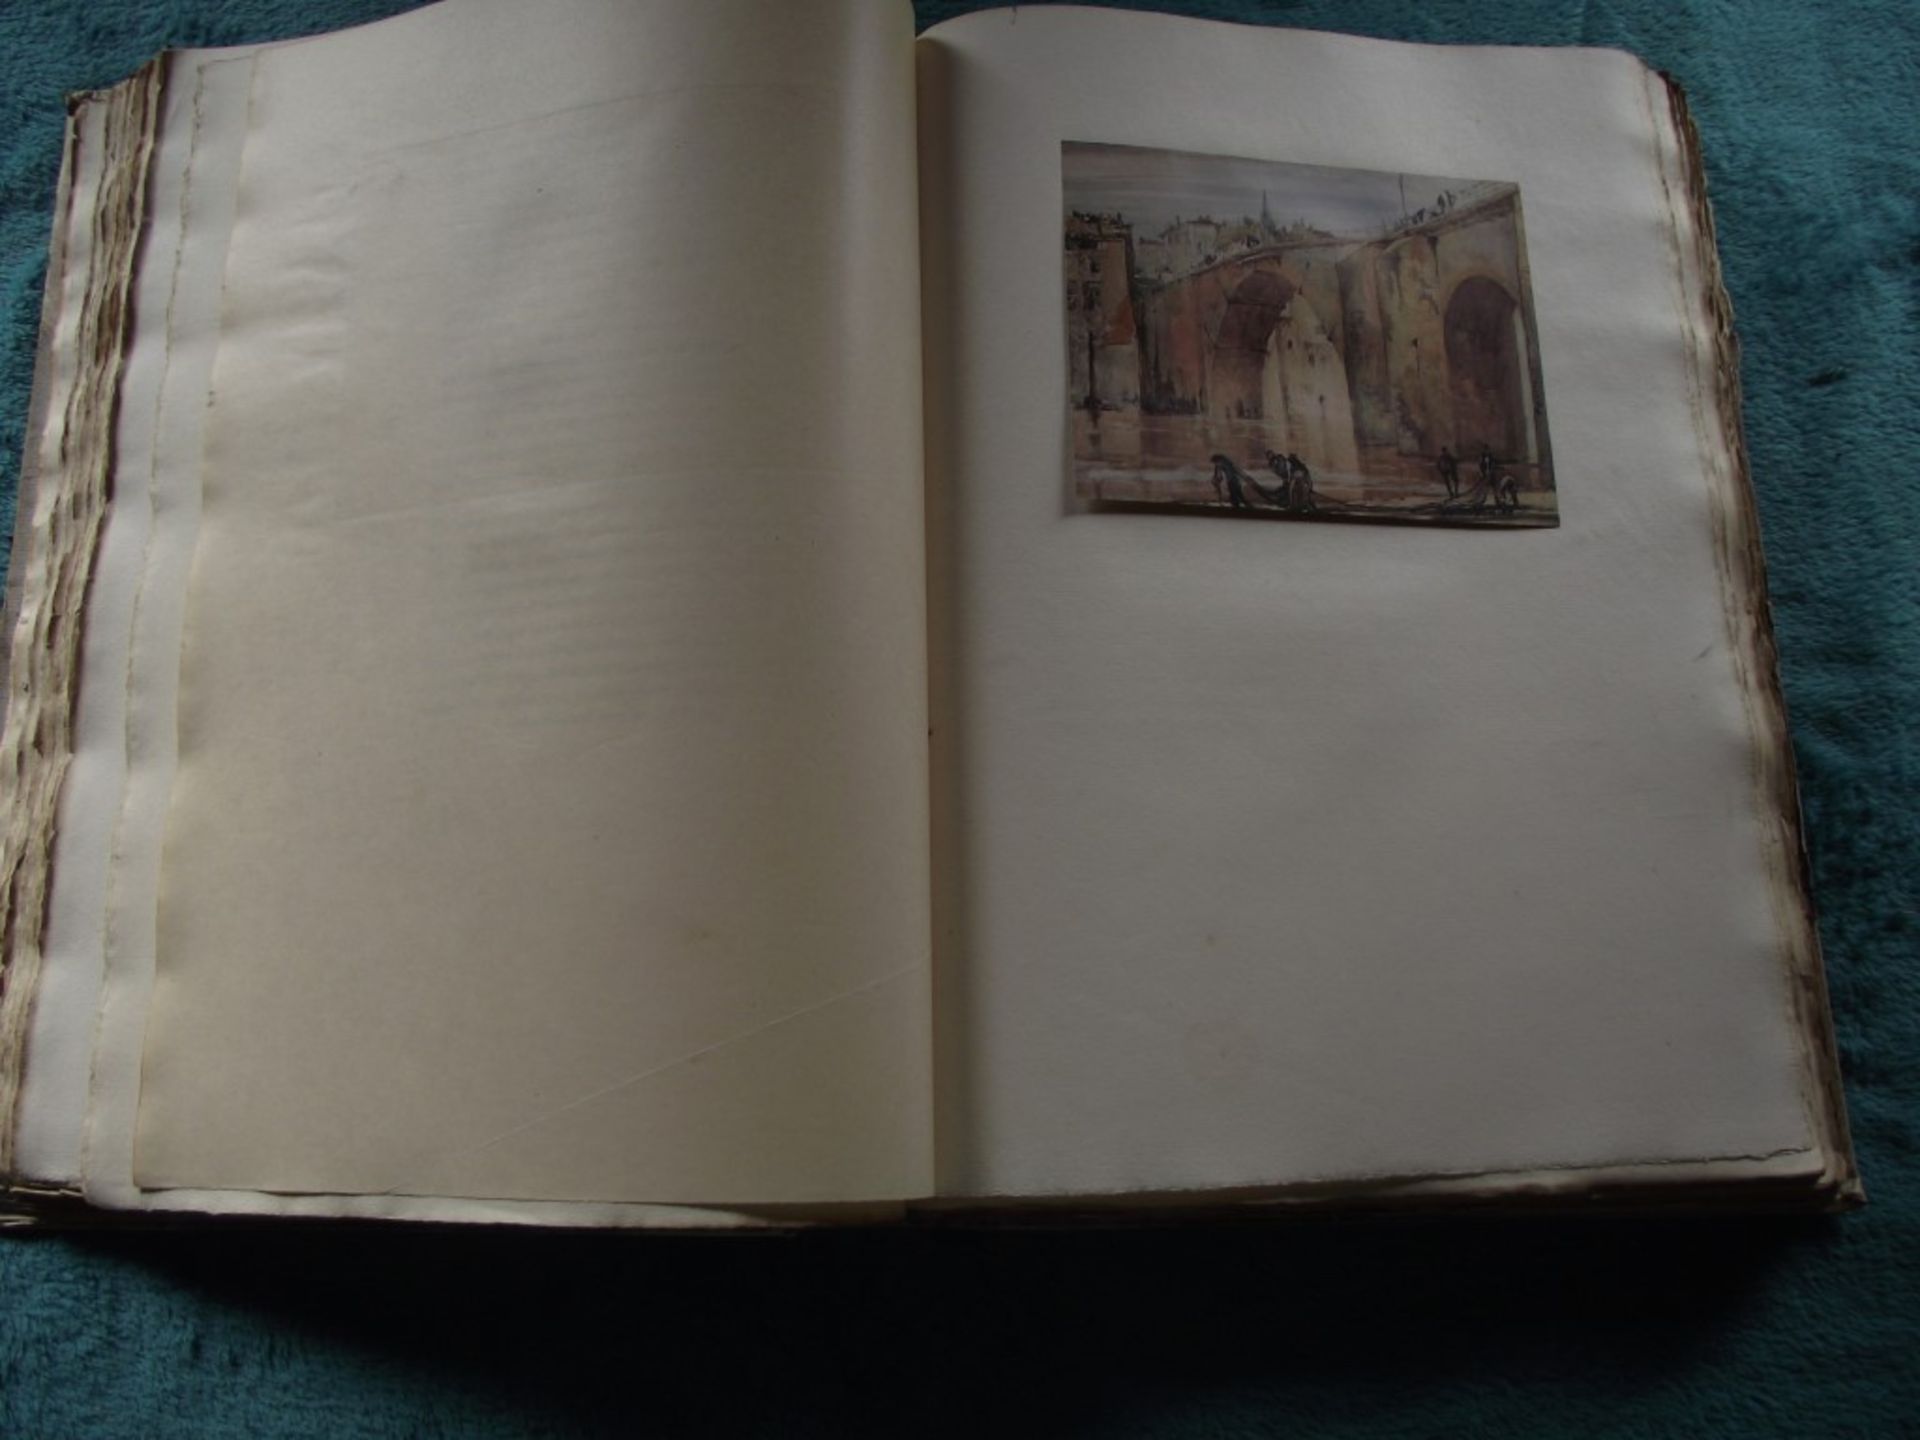 A Book of Bridges by Frank Brangwyn & Walter Shaw Sparrow - Ltd. Edit. 17/75 with Signed Lithograph. - Image 35 of 64